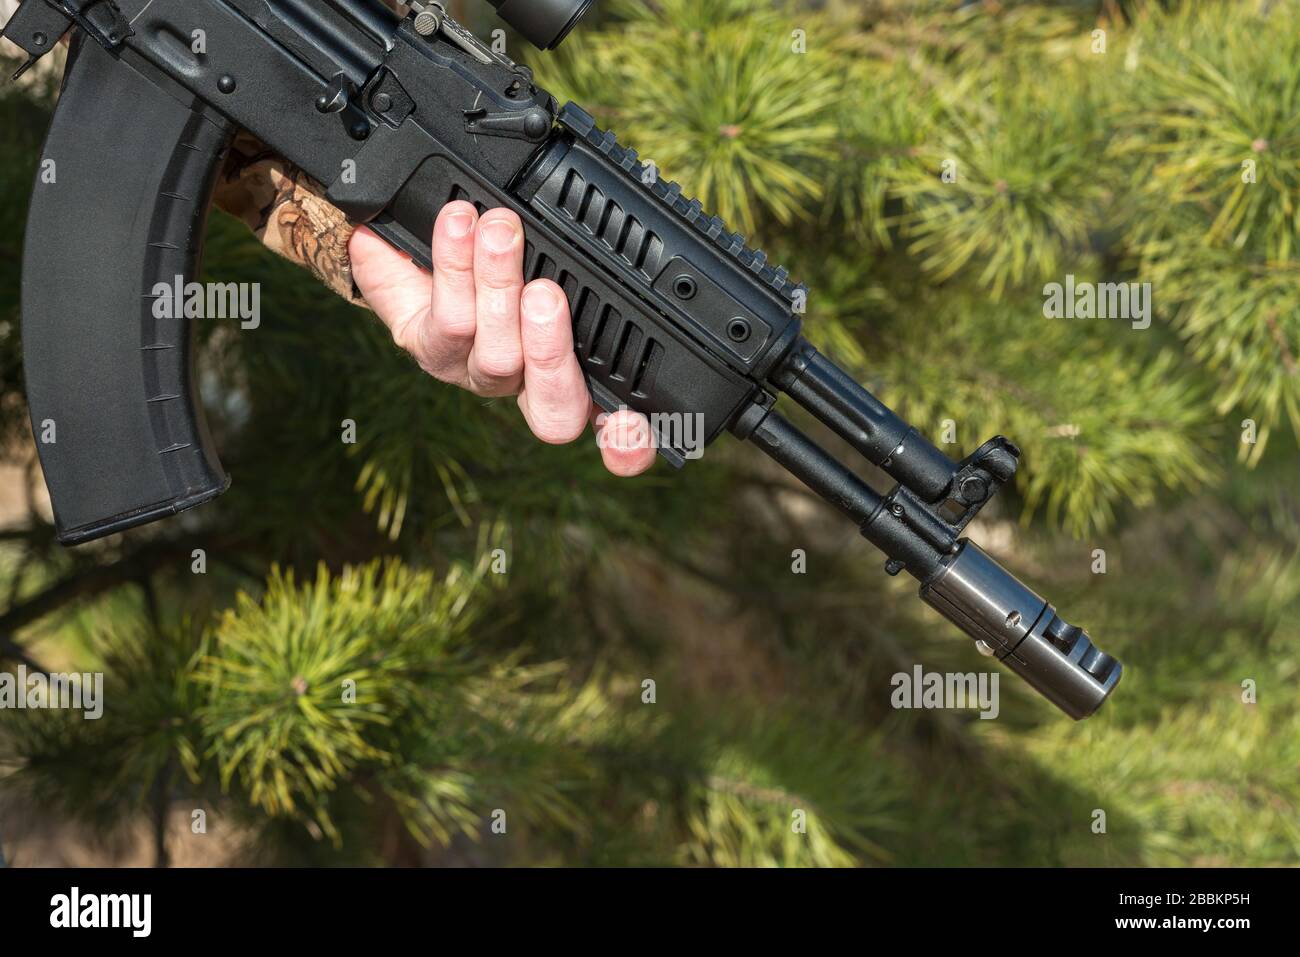 A man is holding a rifle camouflage clothes pine background Stock Photo